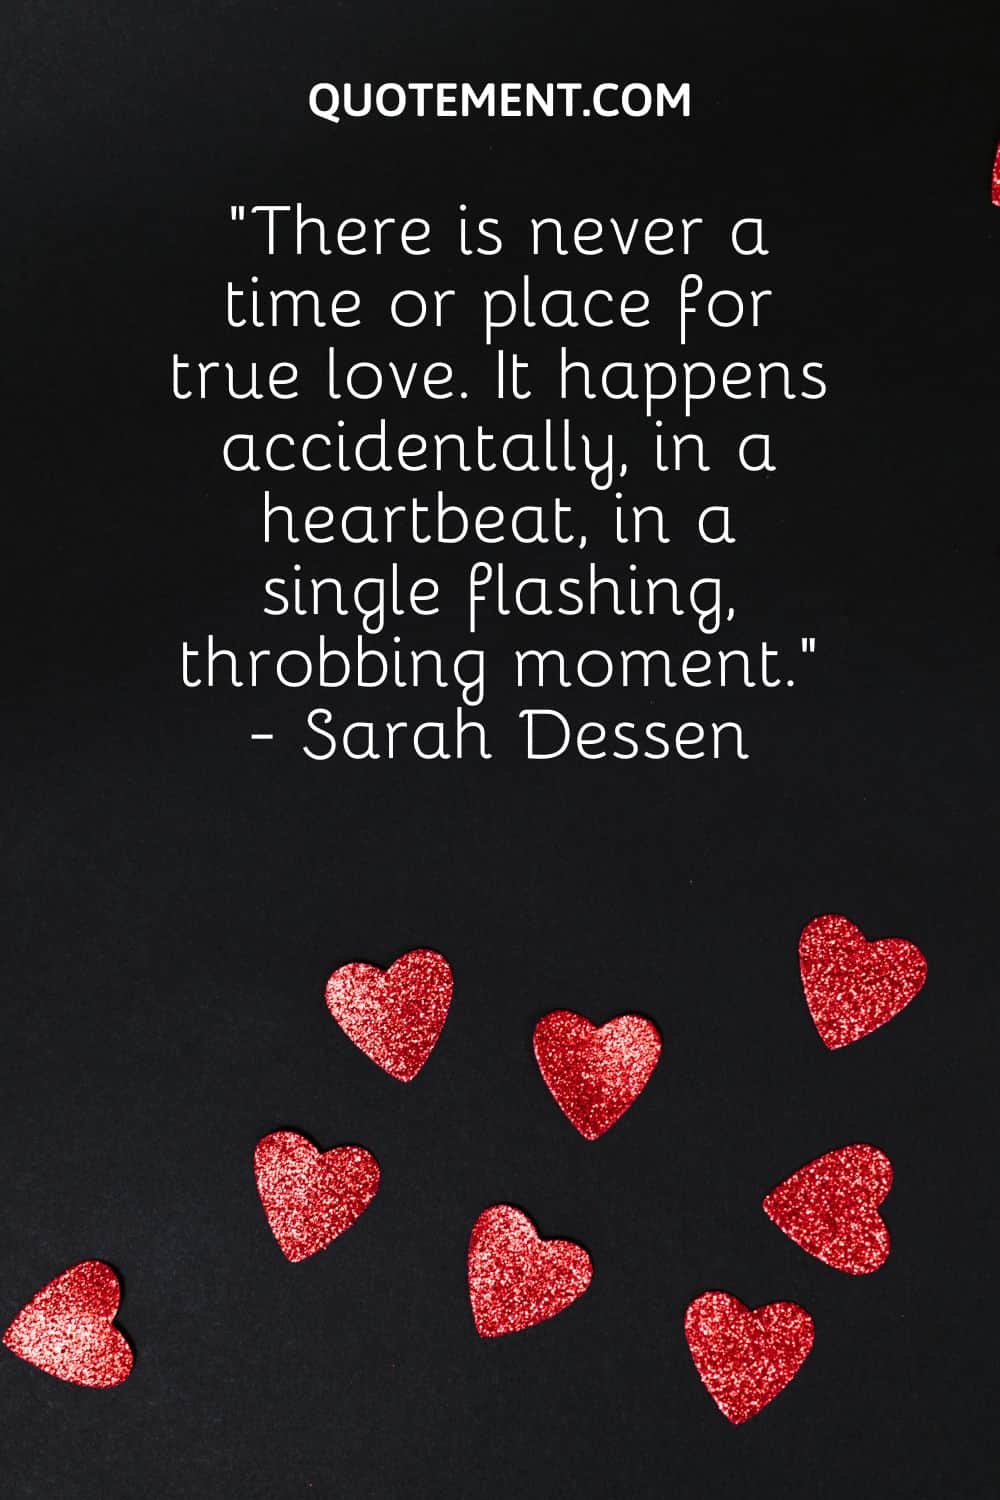 “There is never a time or place for true love. It happens accidentally, in a heartbeat, in a single flashing, throbbing moment.” - Sarah Dessen